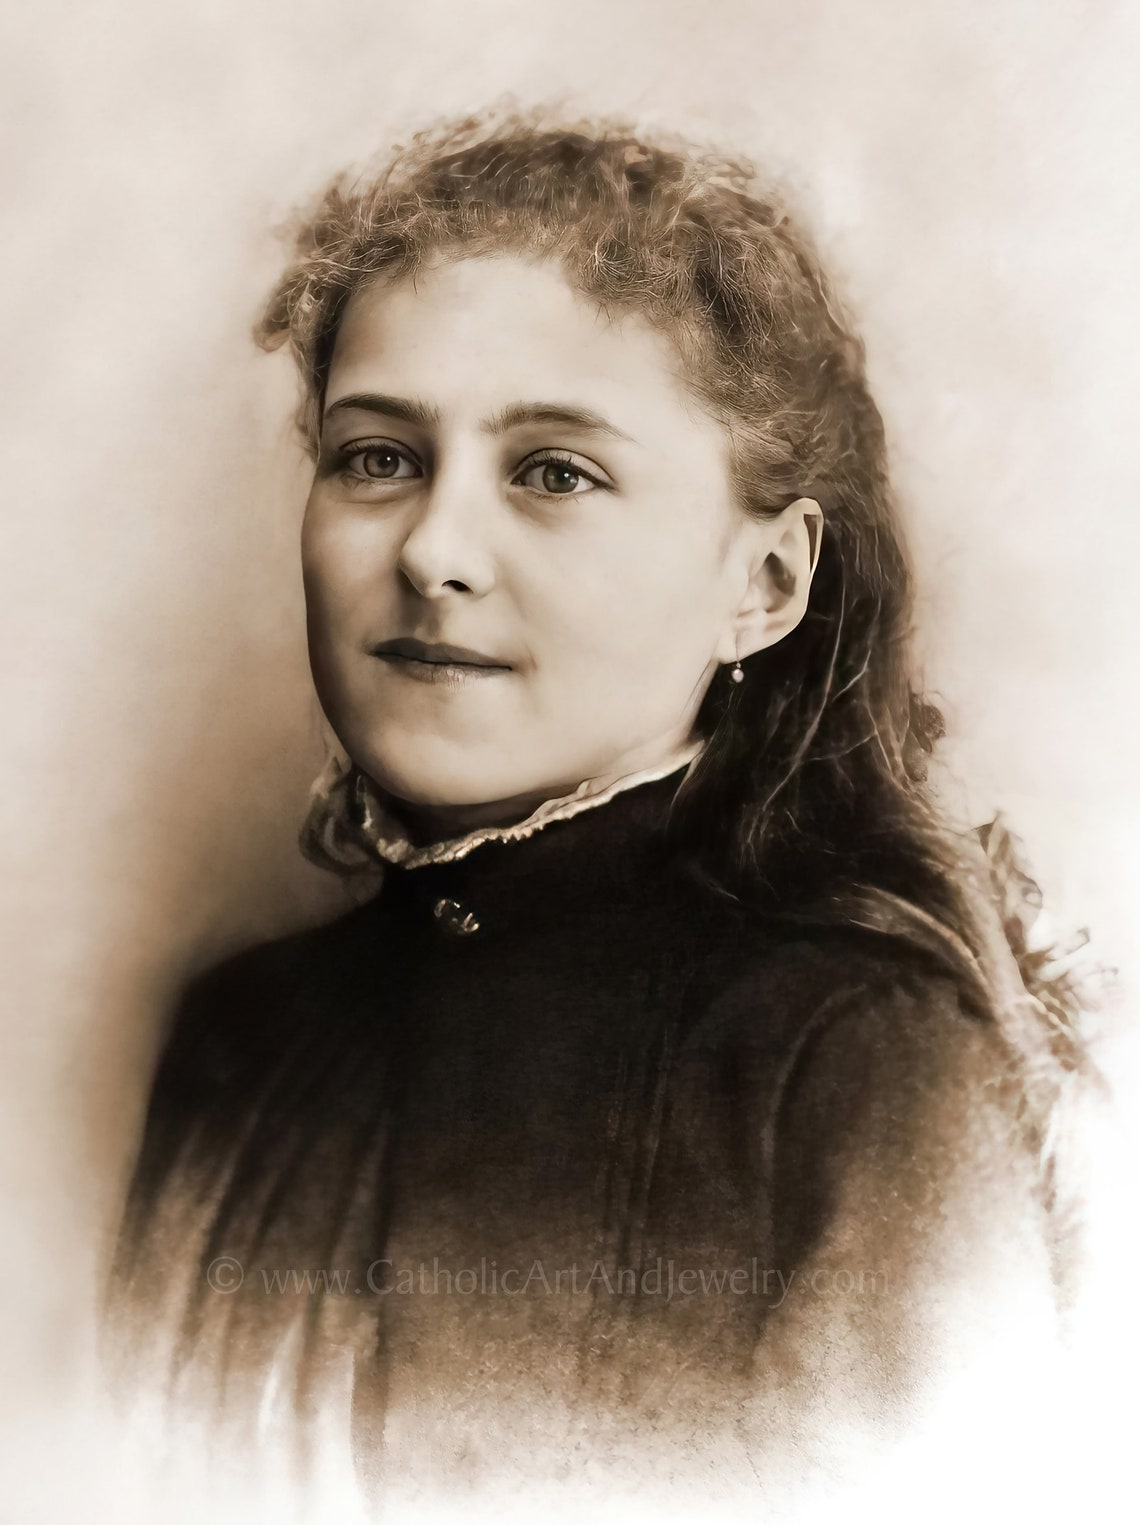 St. Therese Exclusive Restoration Vivid Photo 2 Sizes - Etsy